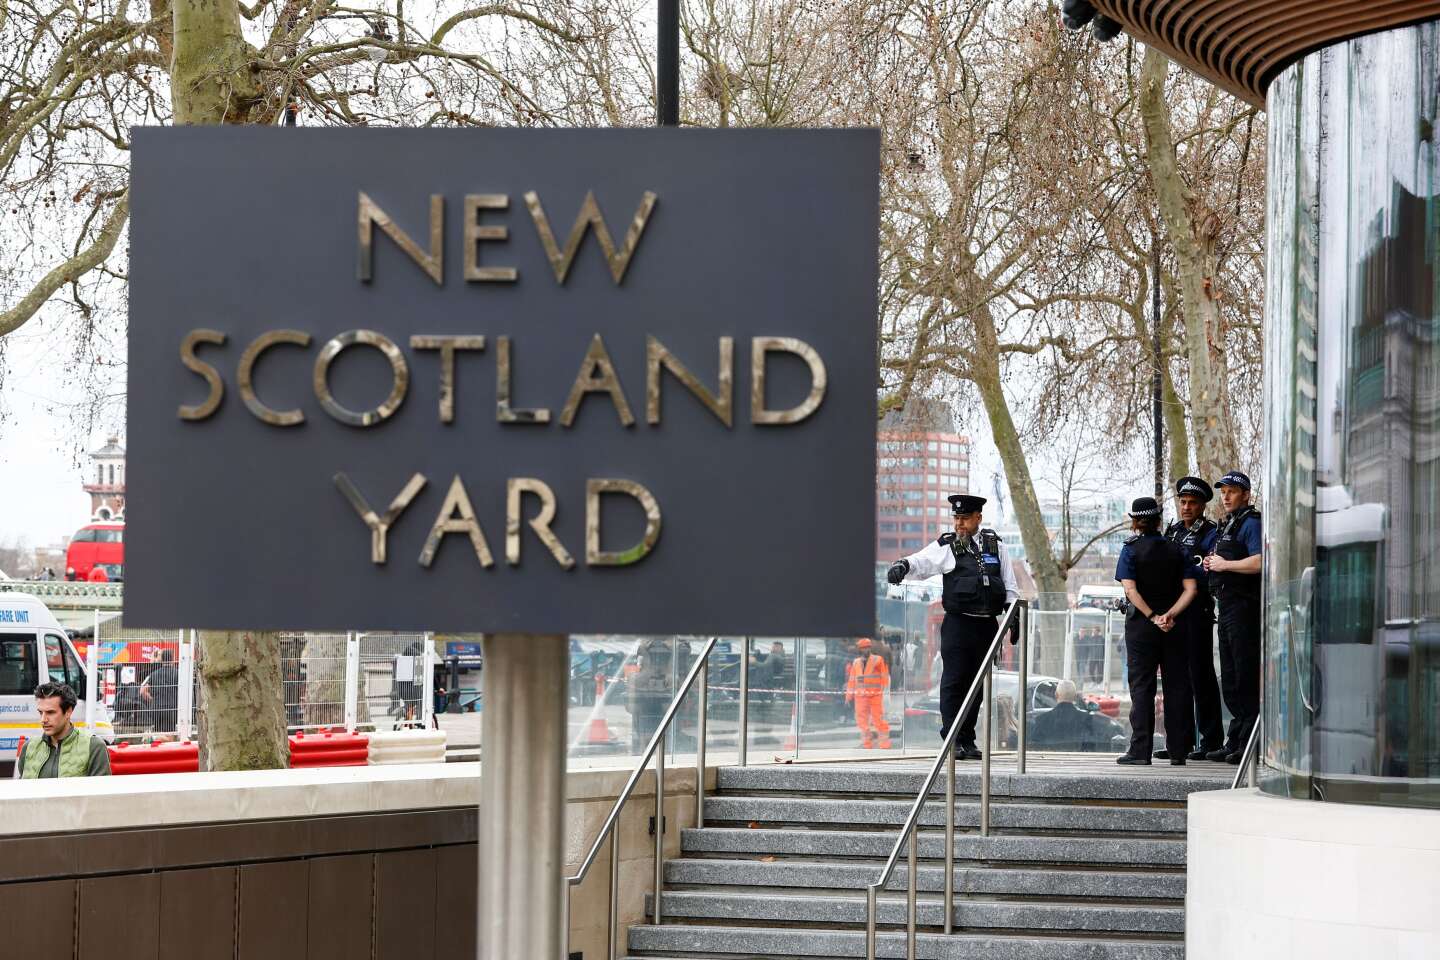 report exposes institutionalized racism, misogyny and homophobia at Scotland Yard